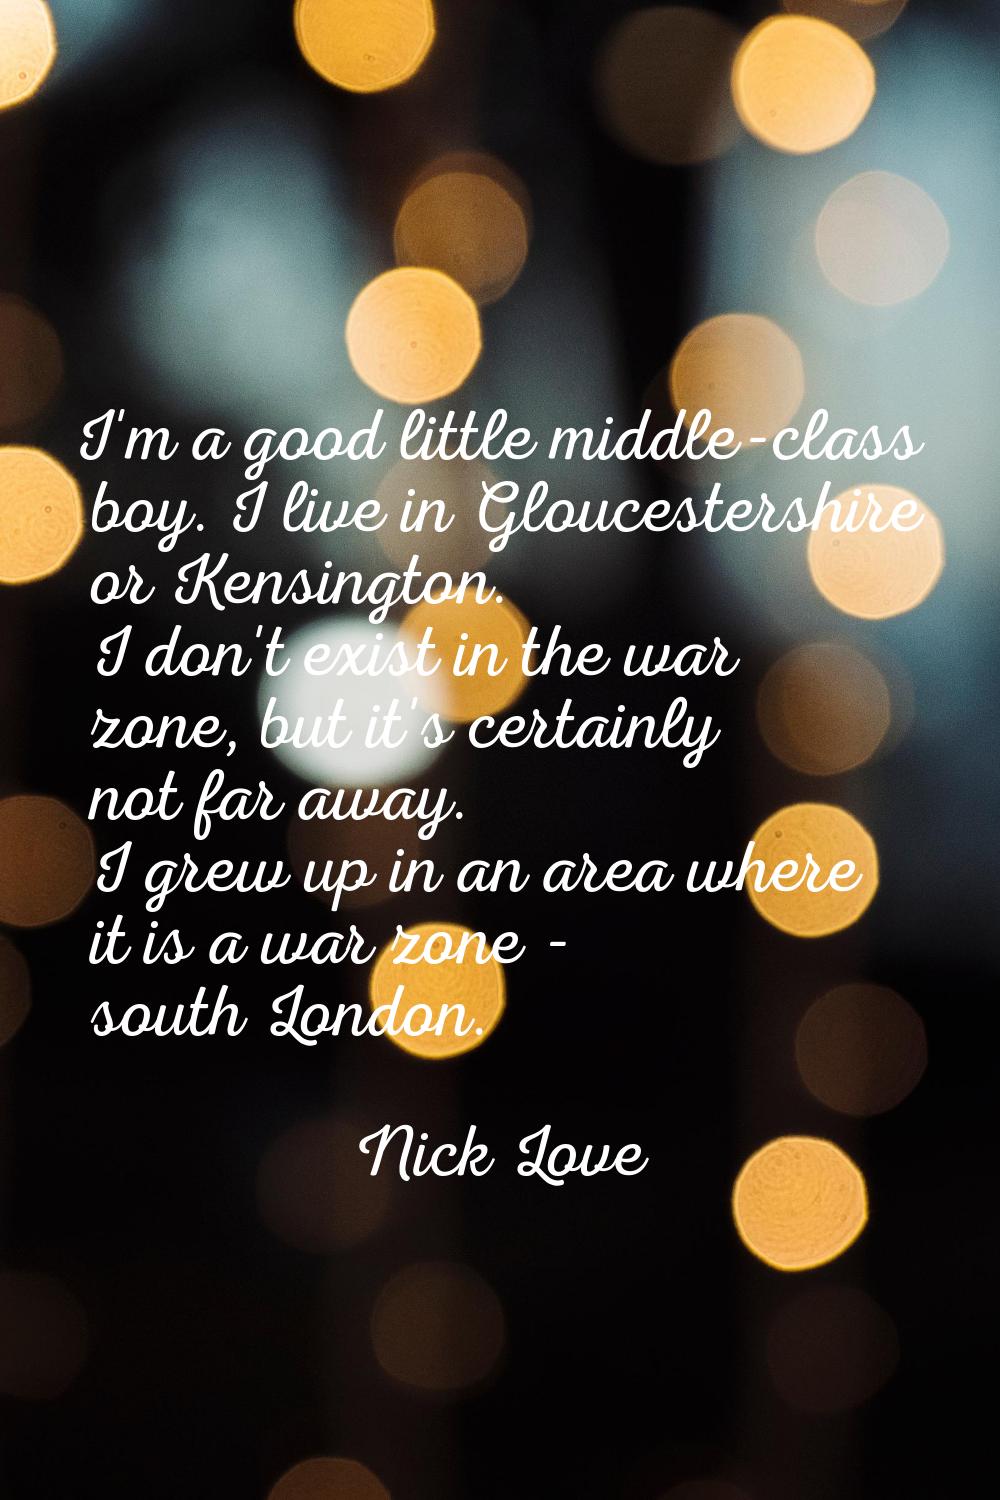 I'm a good little middle-class boy. I live in Gloucestershire or Kensington. I don't exist in the w